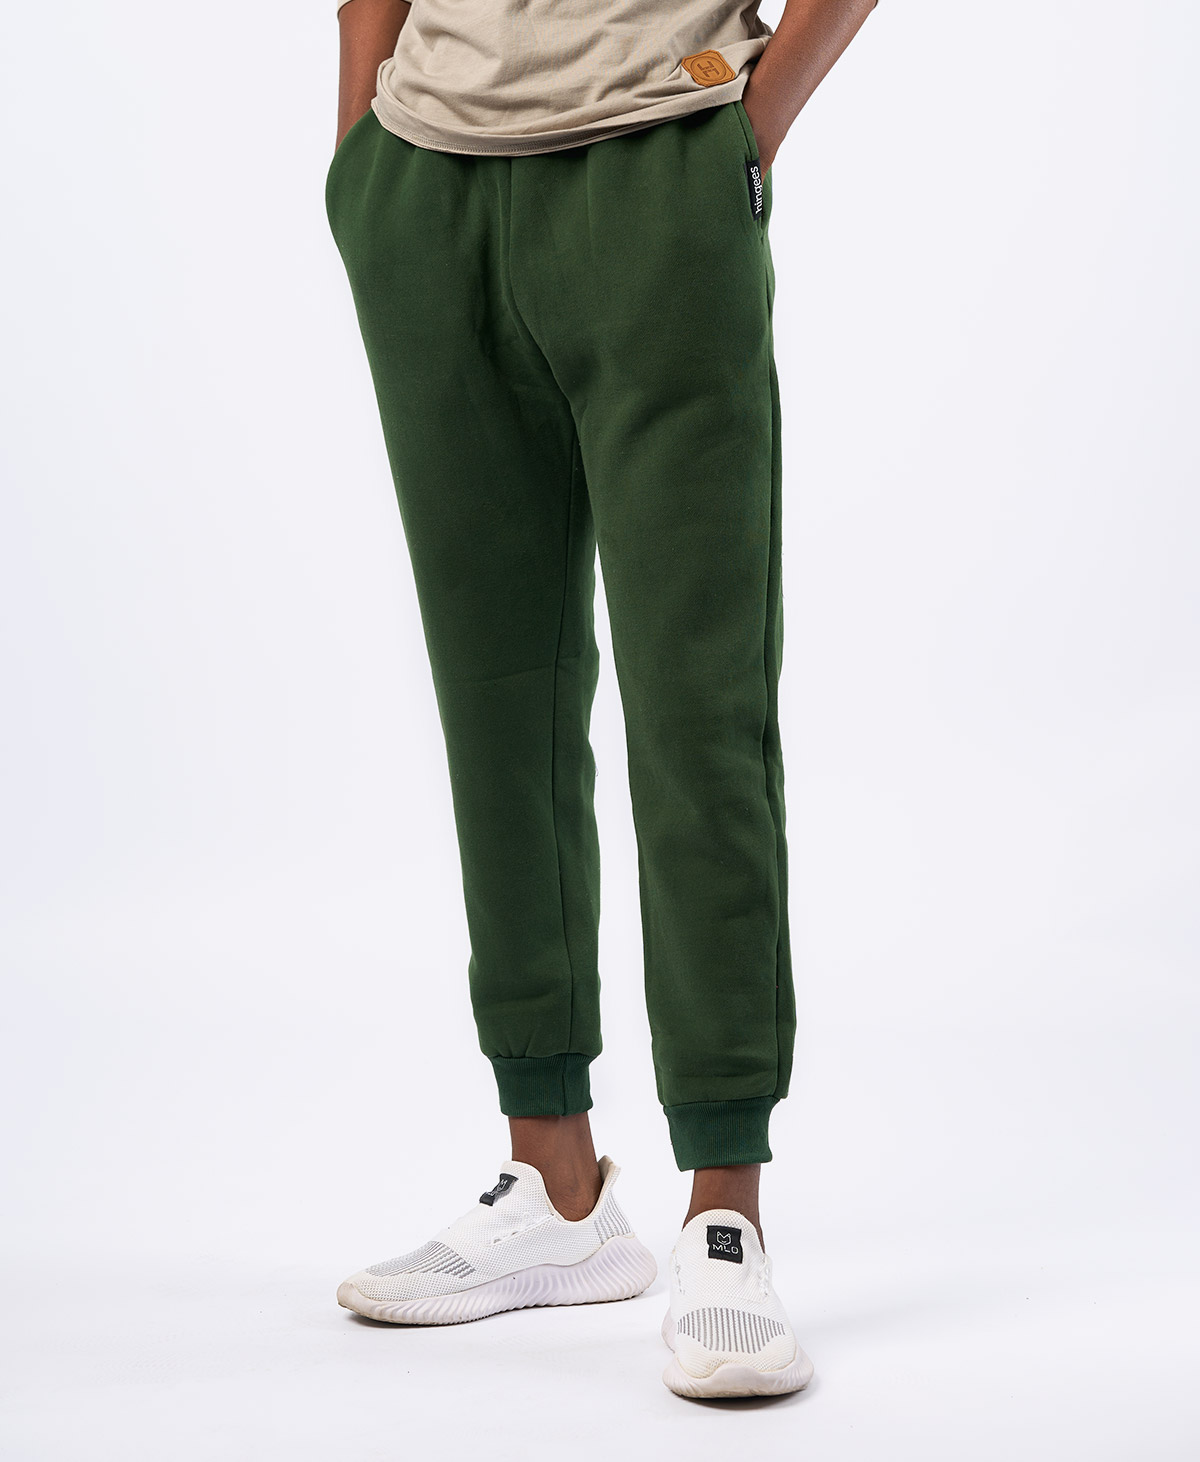 3-in-1 Premium Sweatpants Hingees Pure Cotton Joggers